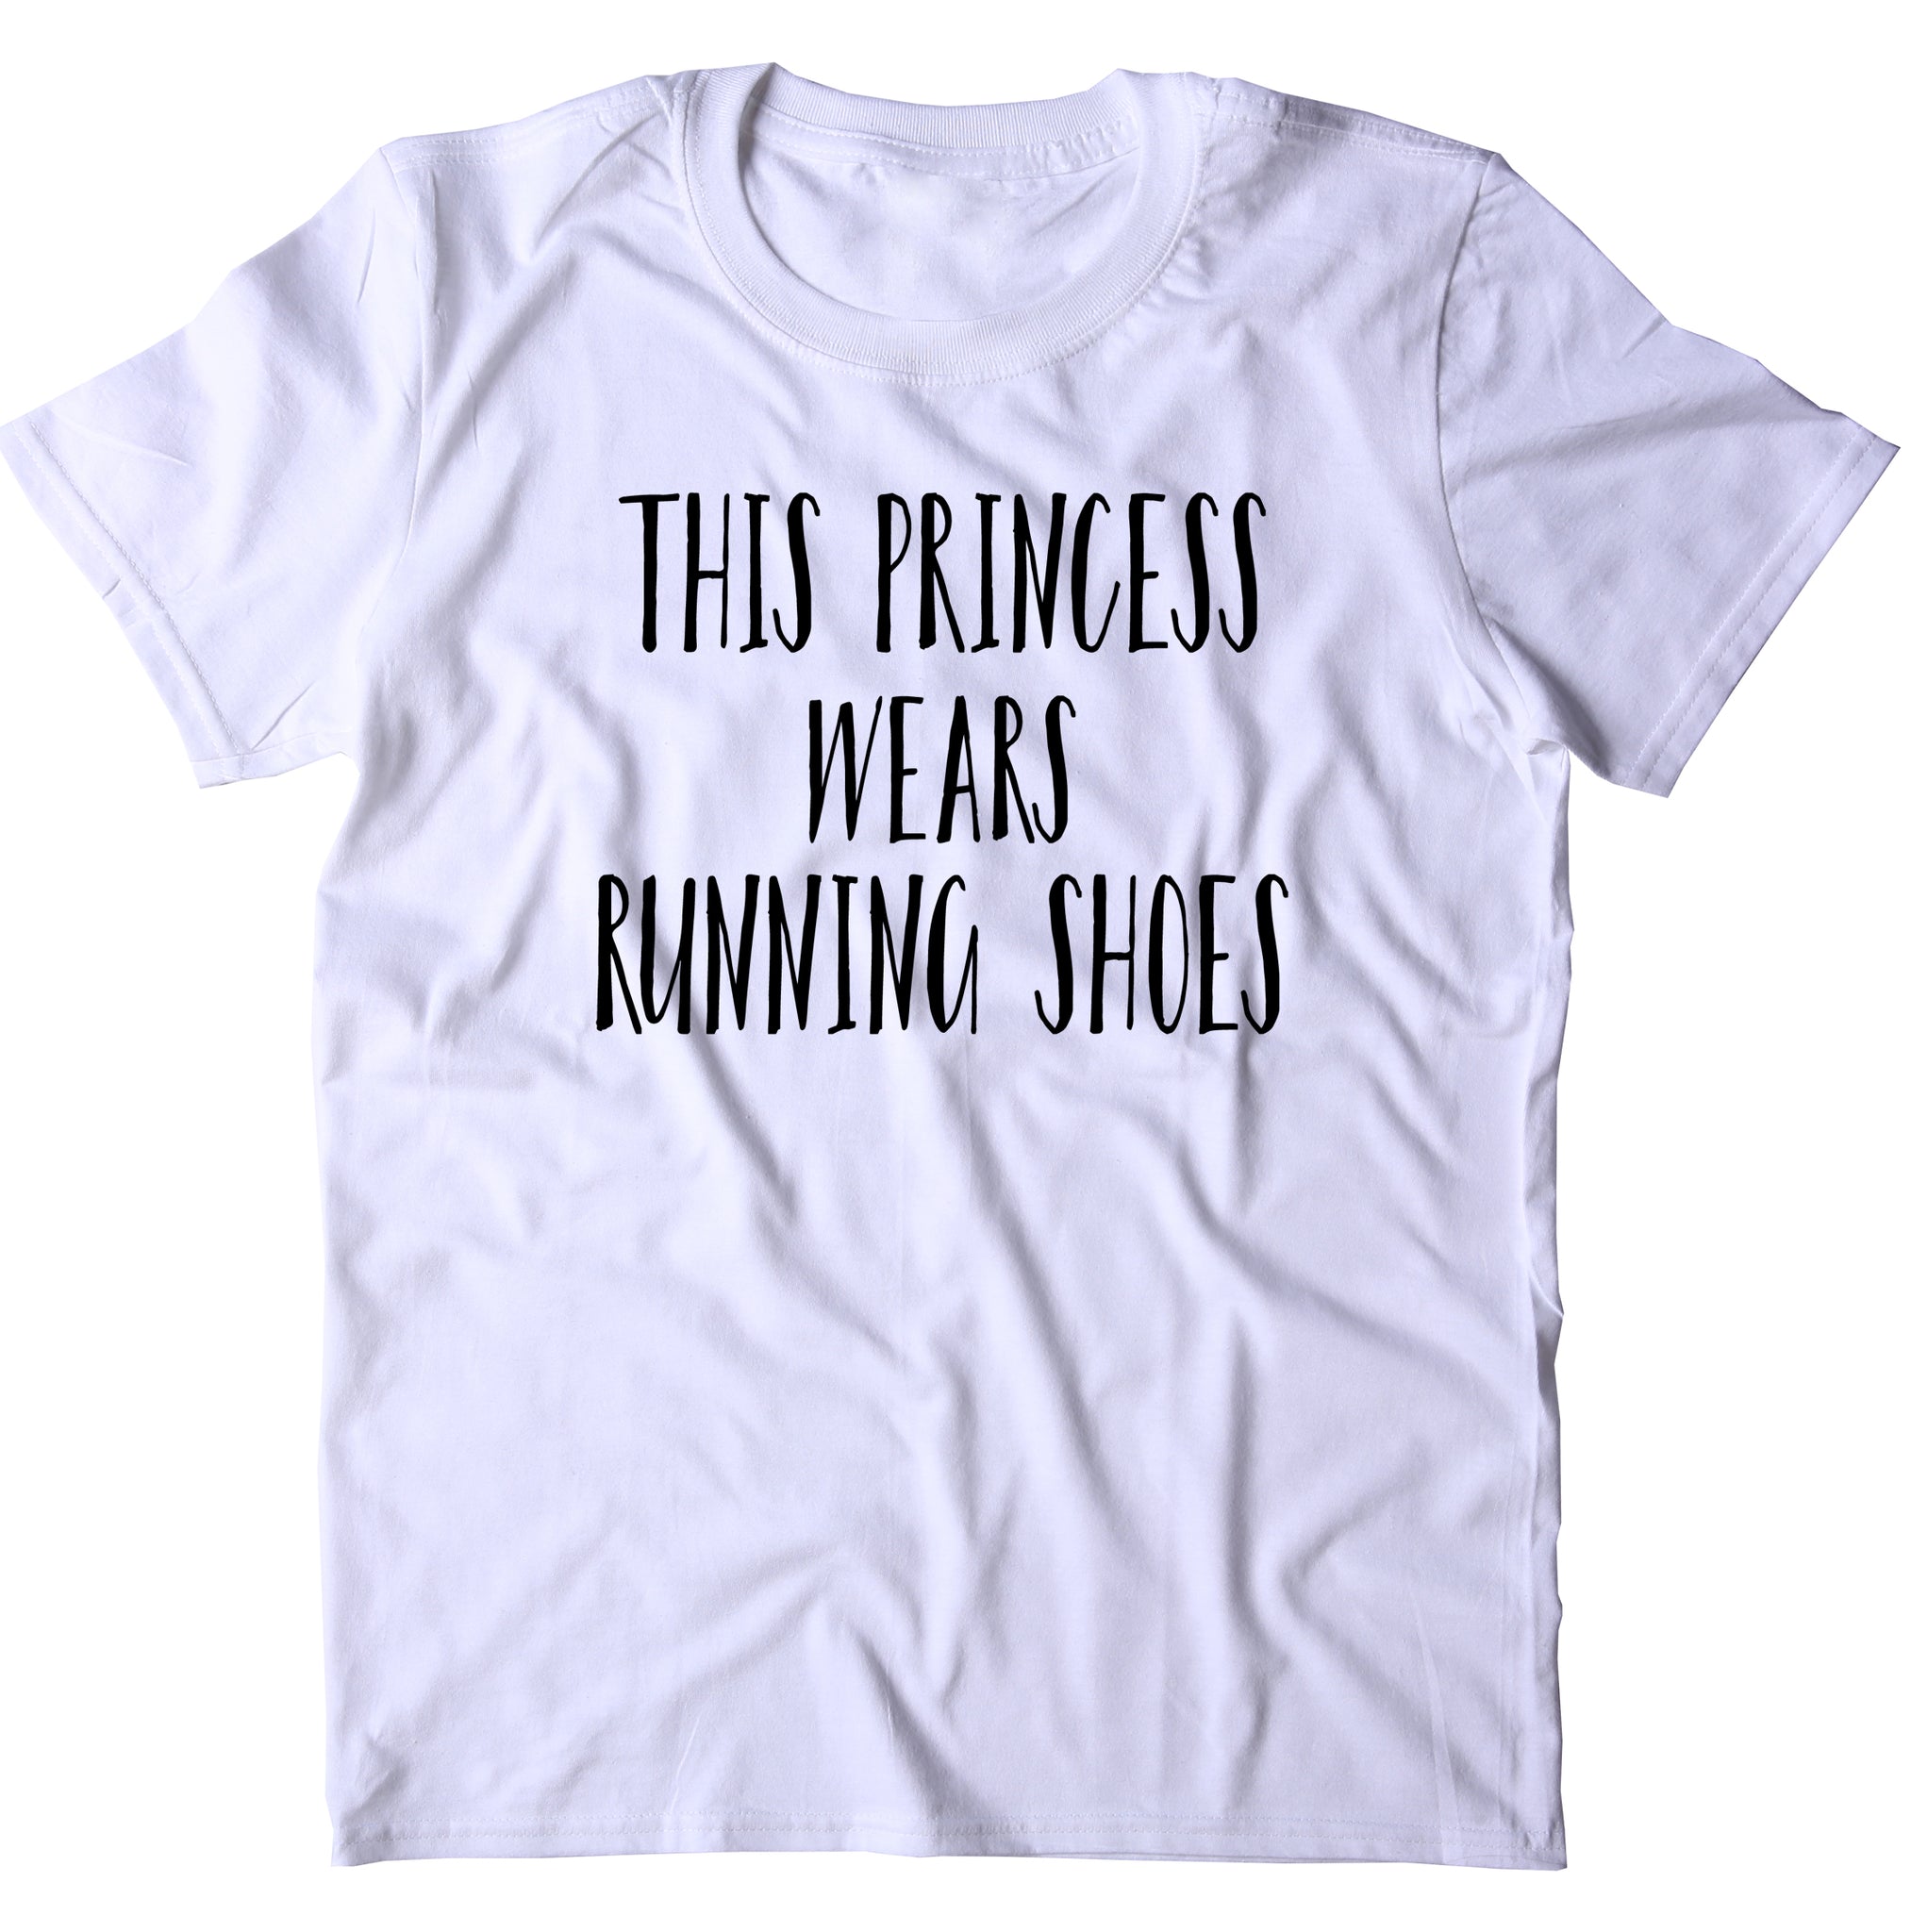 This Princess Wears Shoes Shirt Run And Field Work – Sunray Clothing